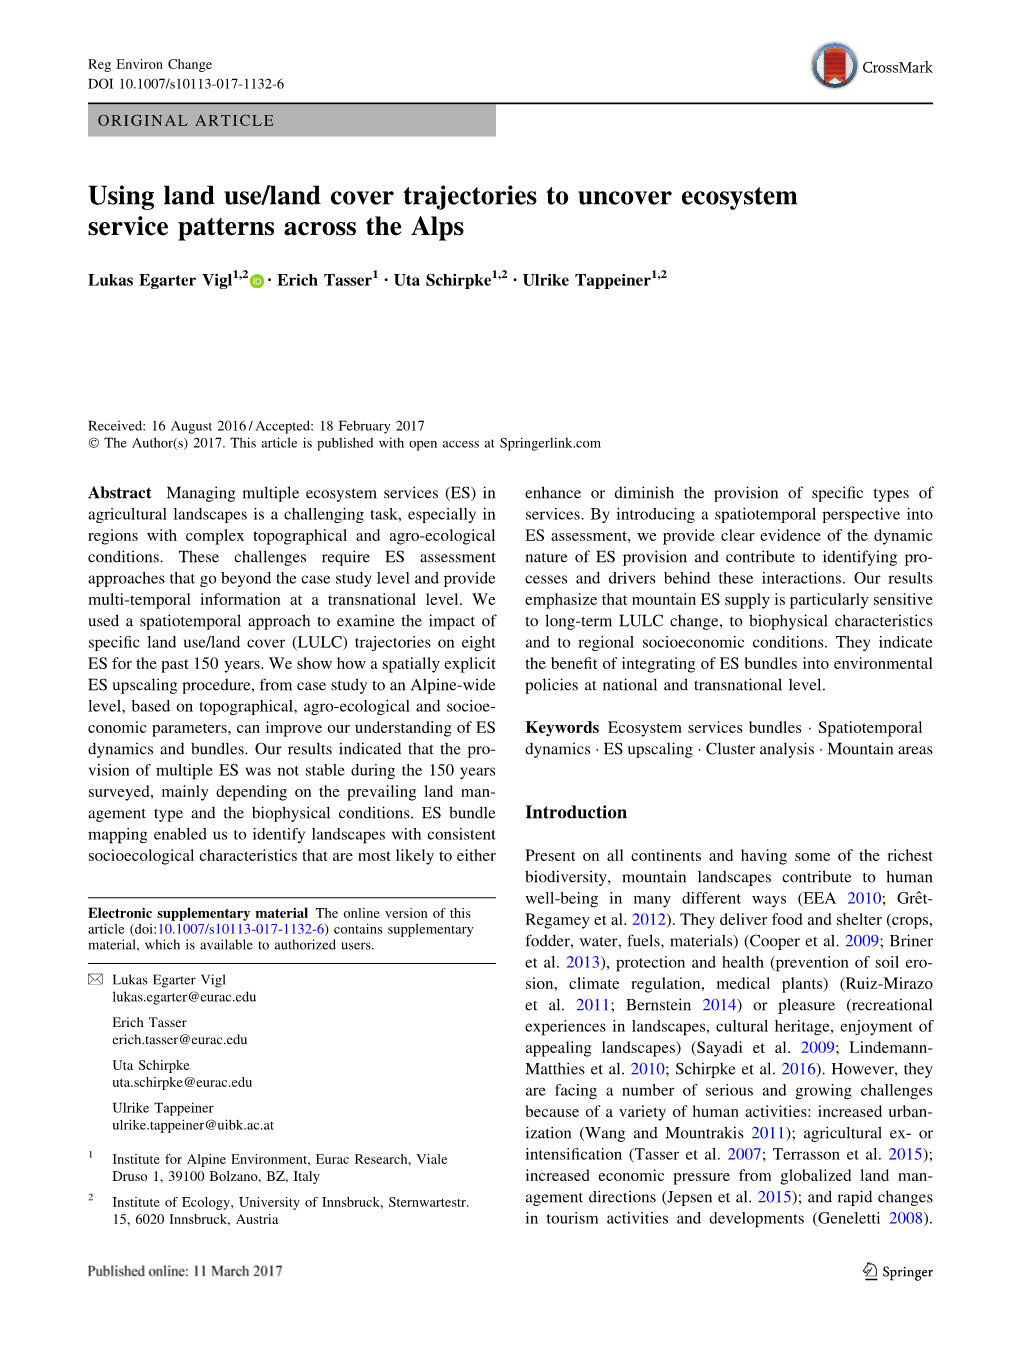 Using Land Use/Land Cover Trajectories to Uncover Ecosystem Service Patterns Across the Alps